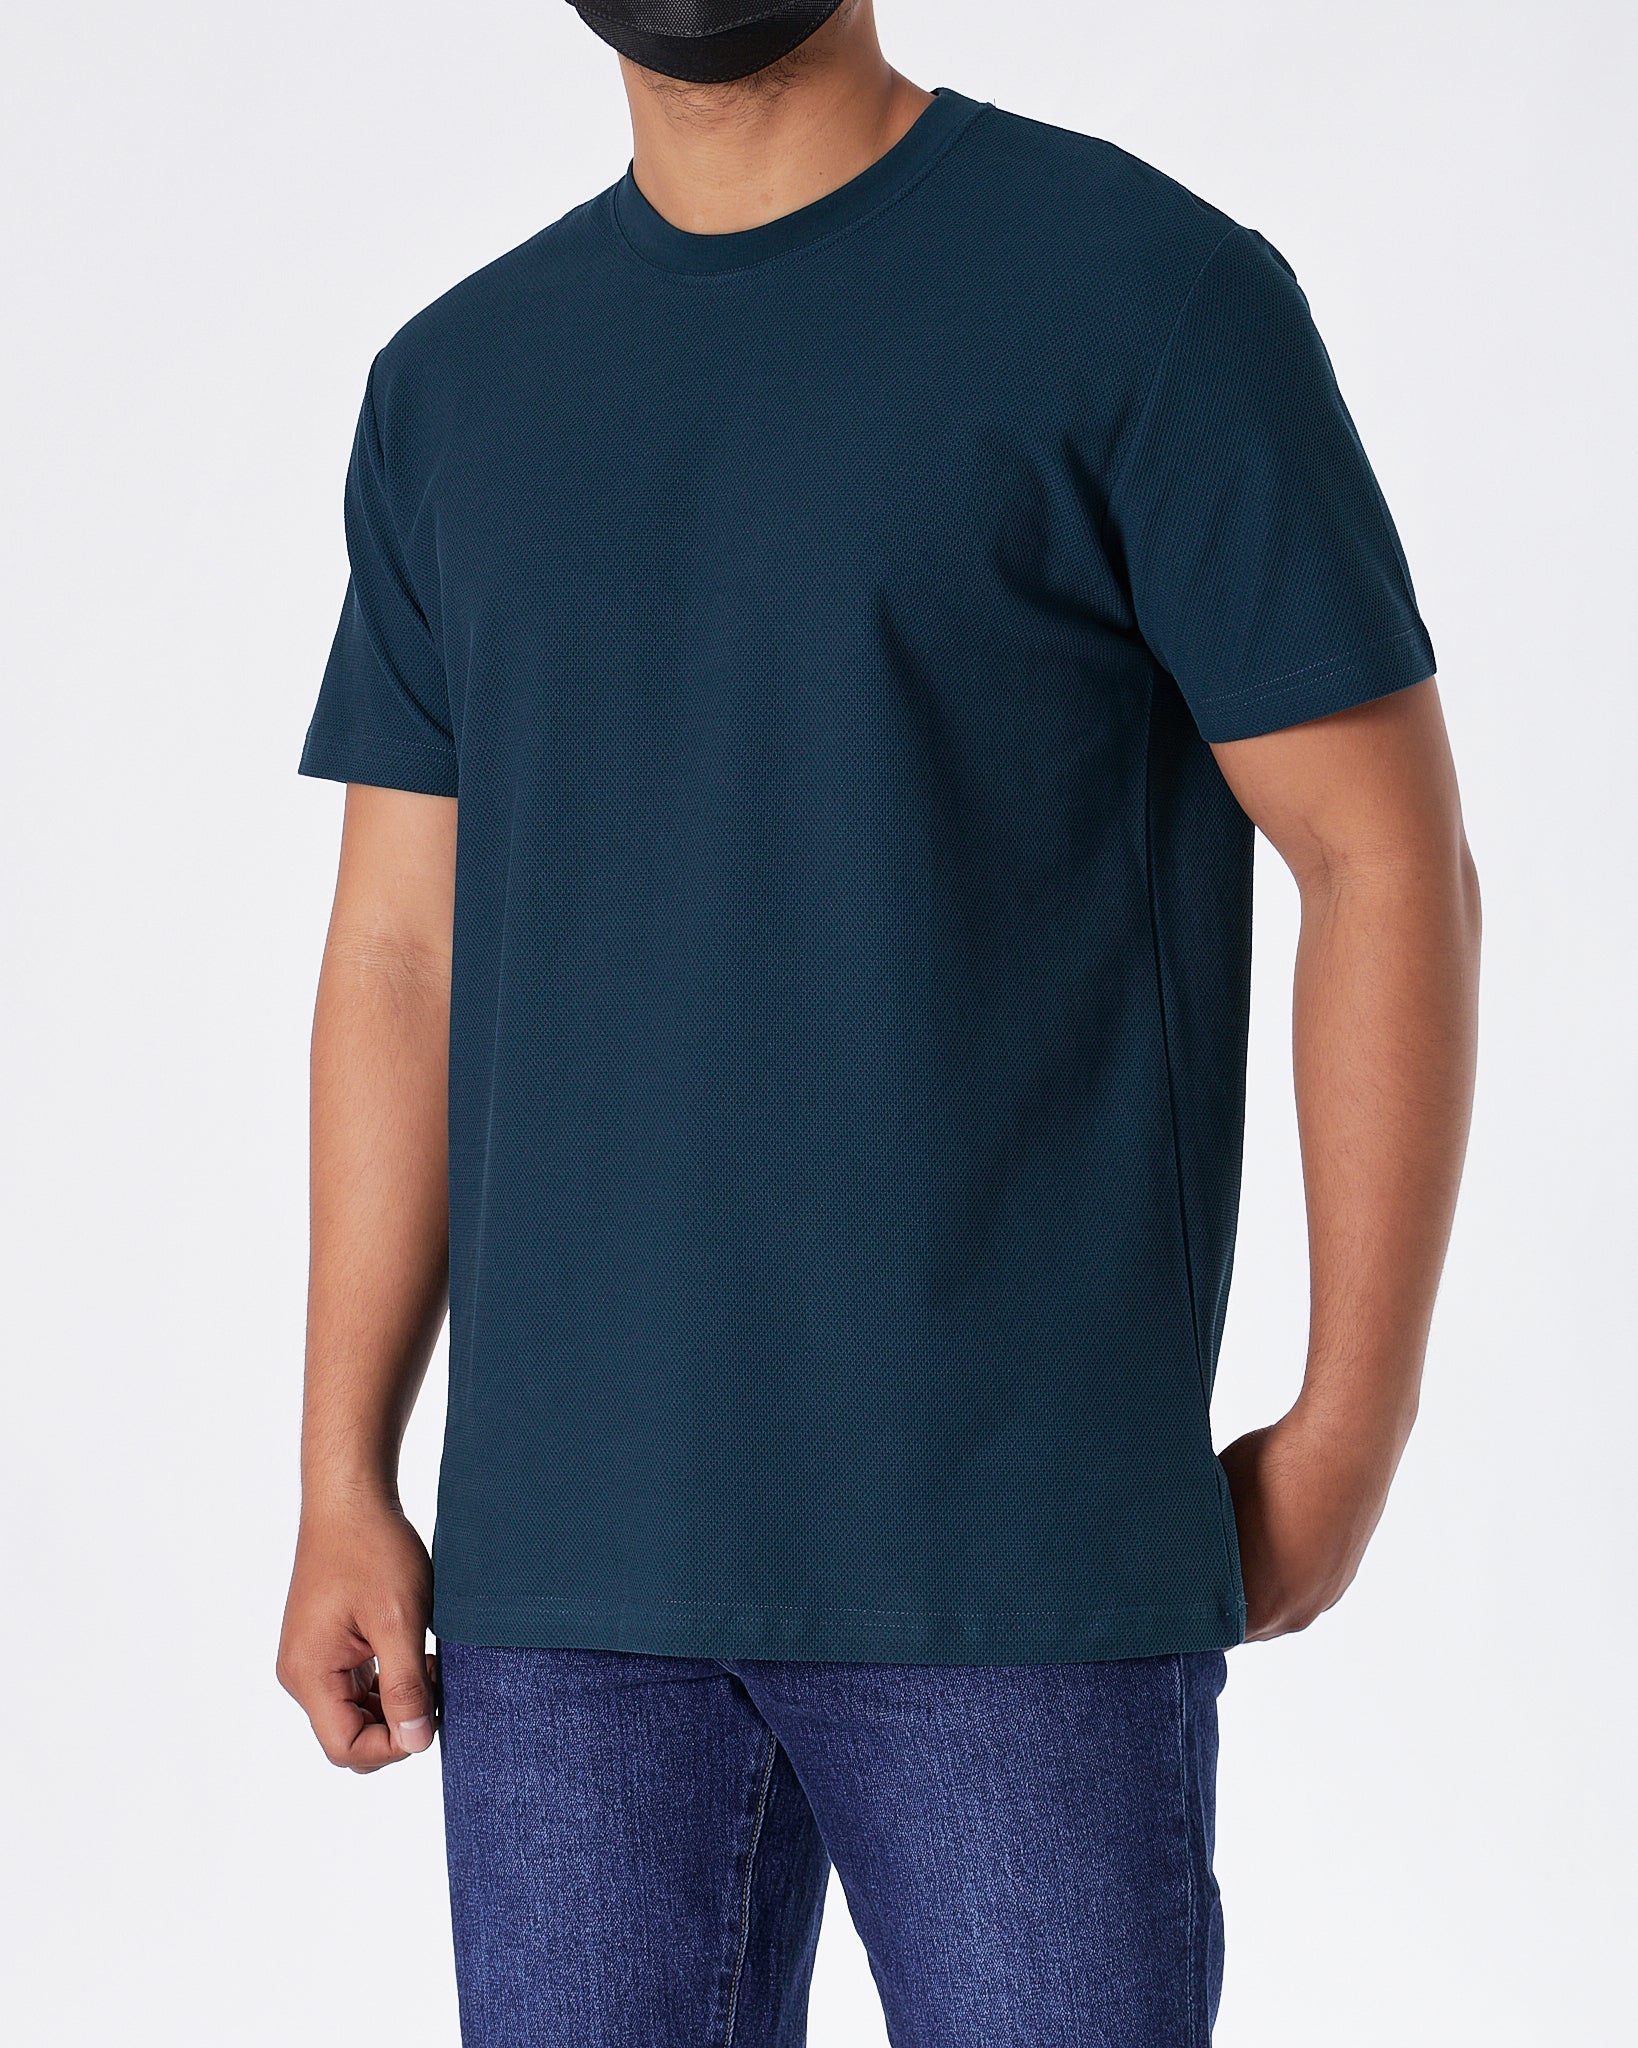 MOI OUTFIT-ABA Solid Color Comfort Men Green T-Shirt 14.90